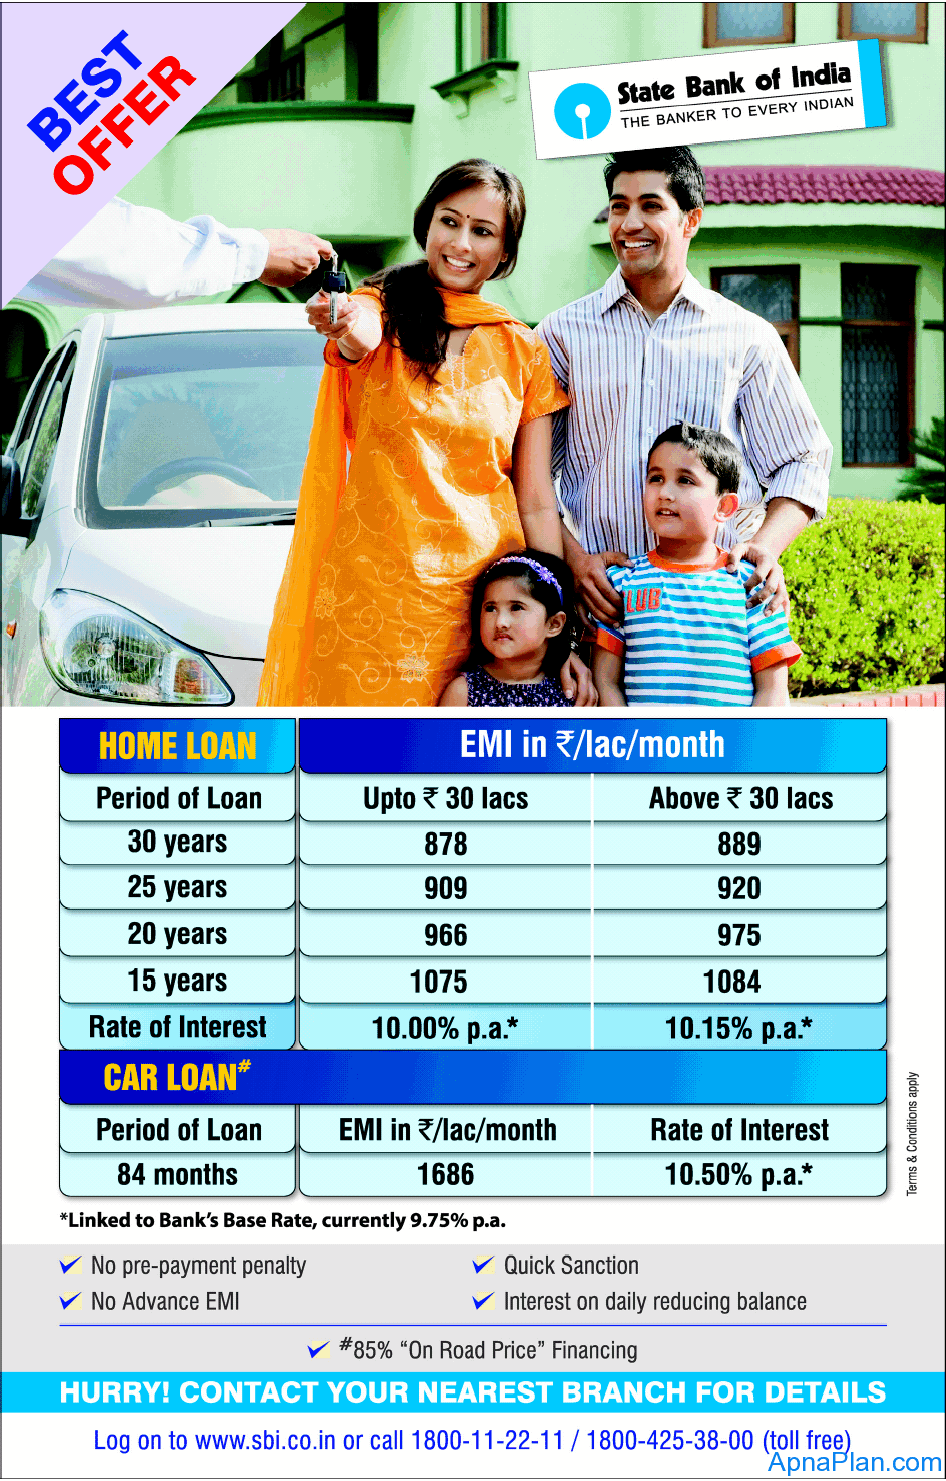 Cheapest Home Loan From SBI - October 2012